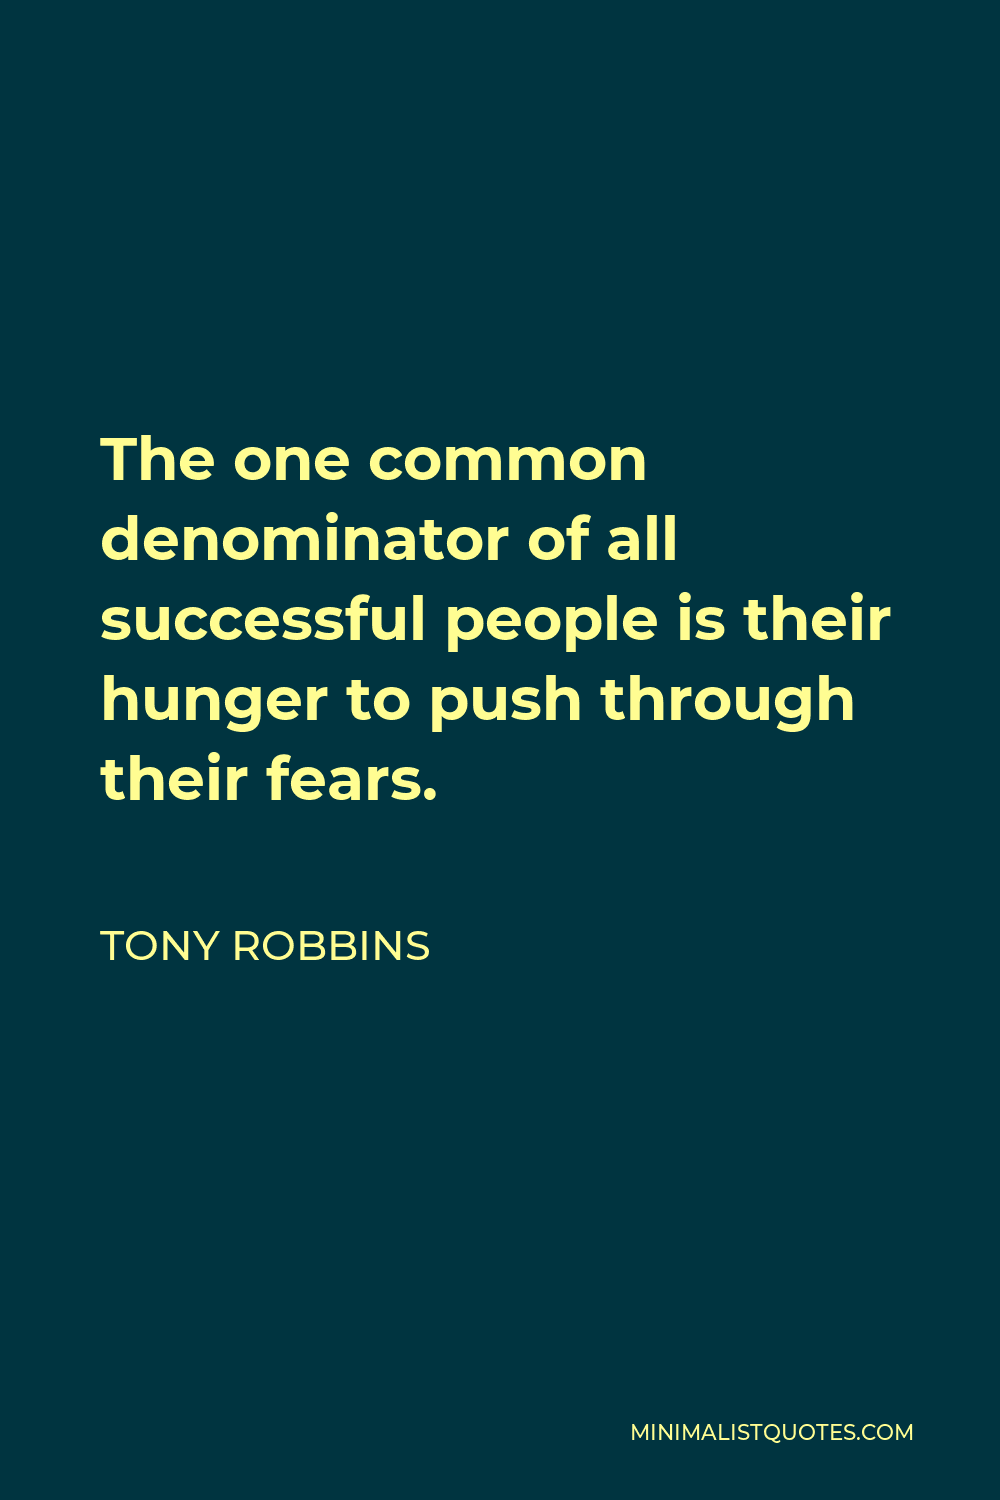 Tony Robbins Quote - The one common denominator of all successful people is their hunger to push through their fears.